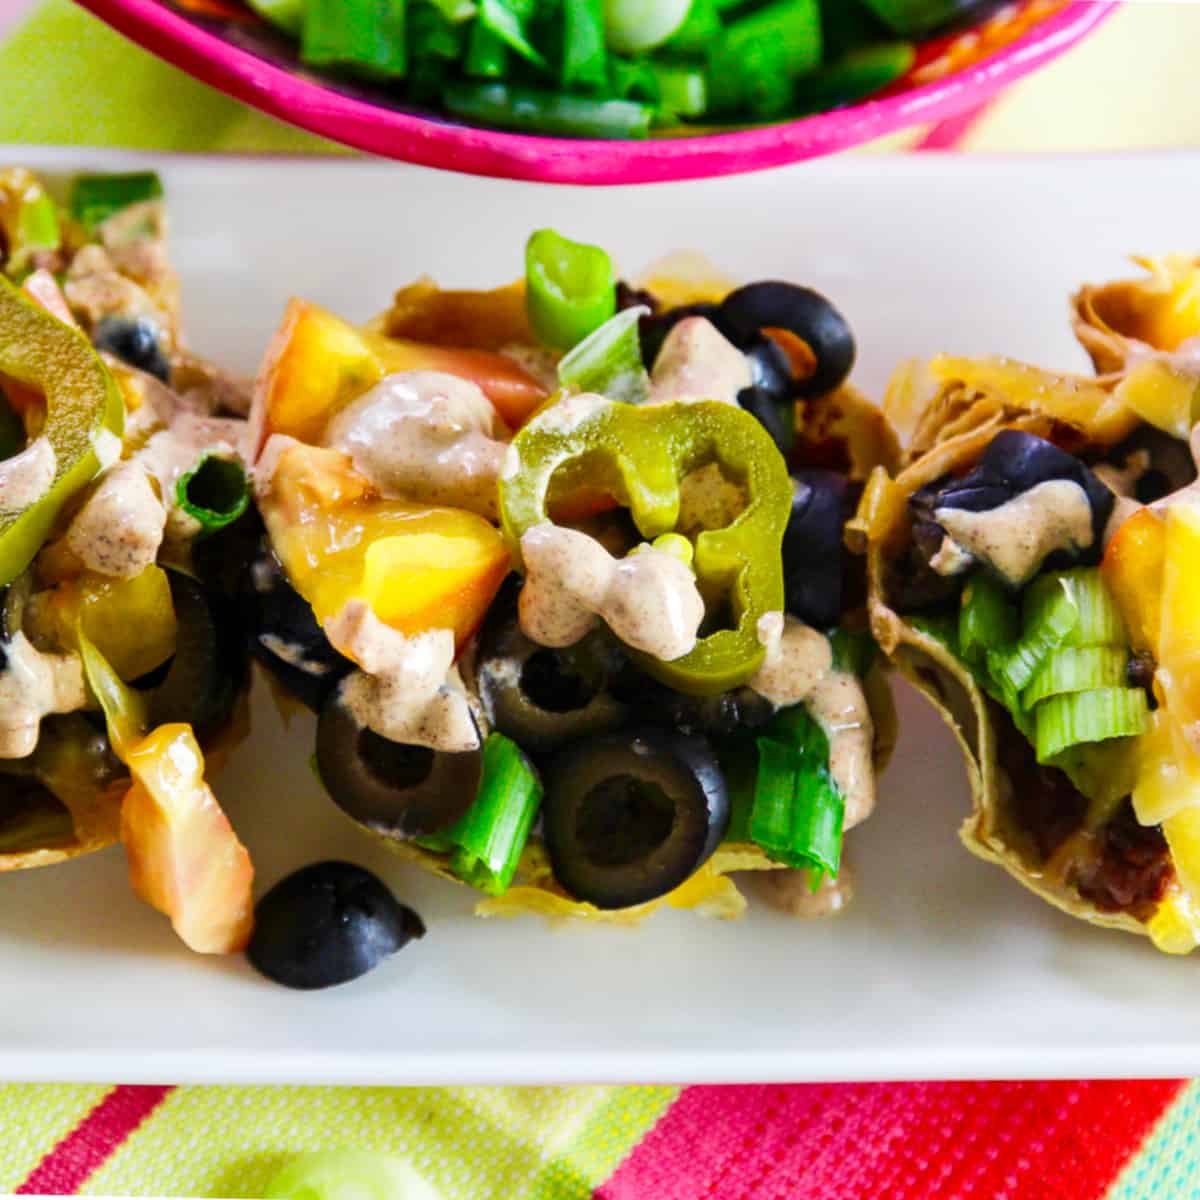 Small mini tacos topped with black olives, tomato, green onions, cheese and crema sauce.